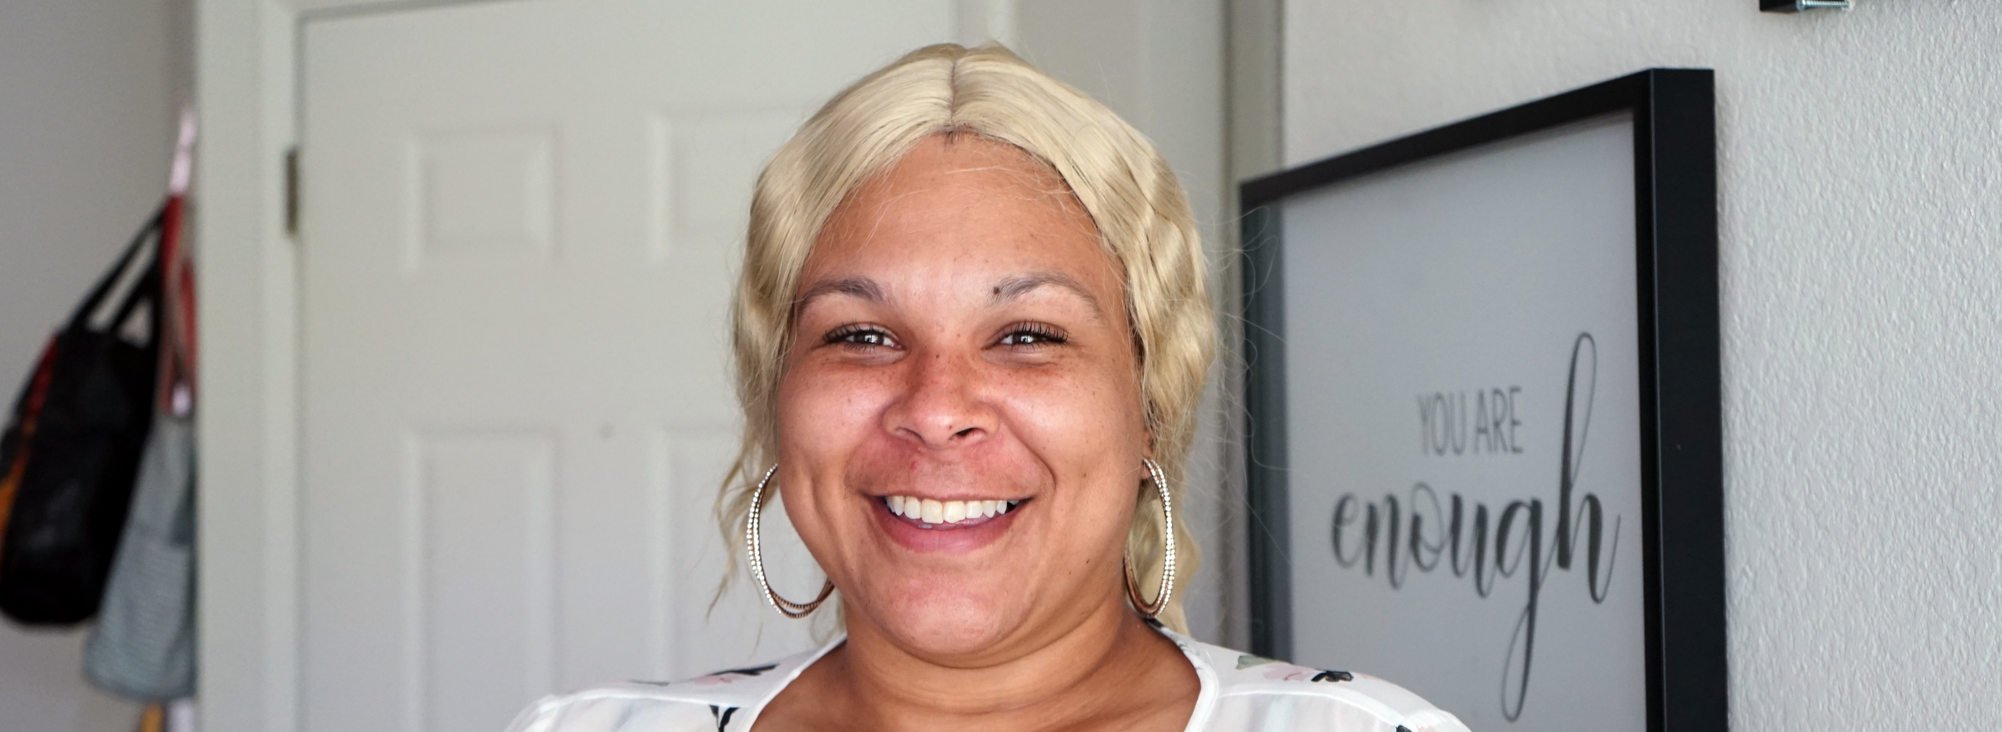 Smiling woman in white blouse with platinum blonde hair. 